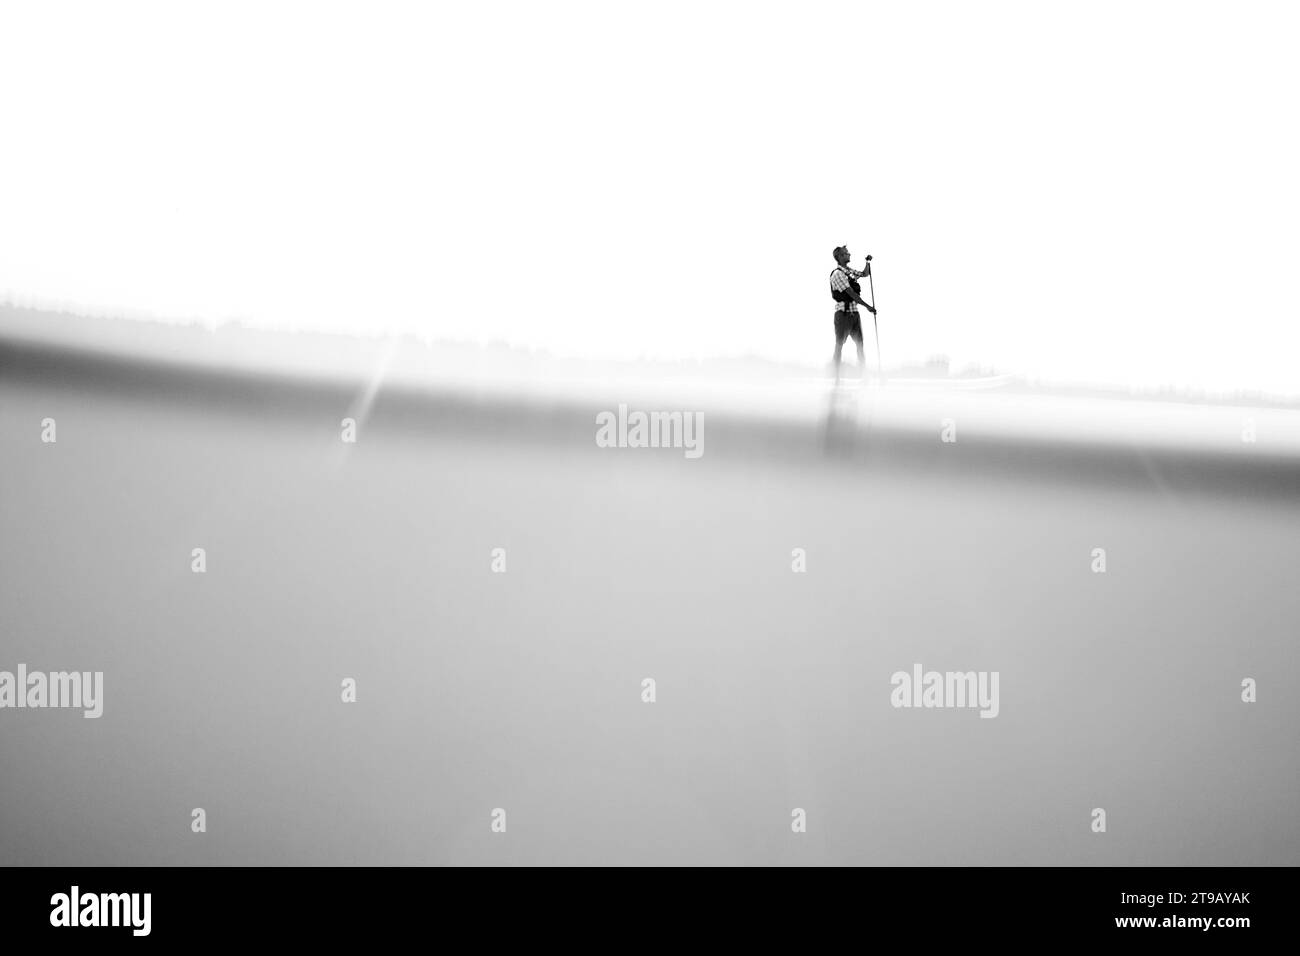 Black and white low angle split level image of one man paddling a stand up paddleboarding (SUP) against a blown out sky. Stock Photo